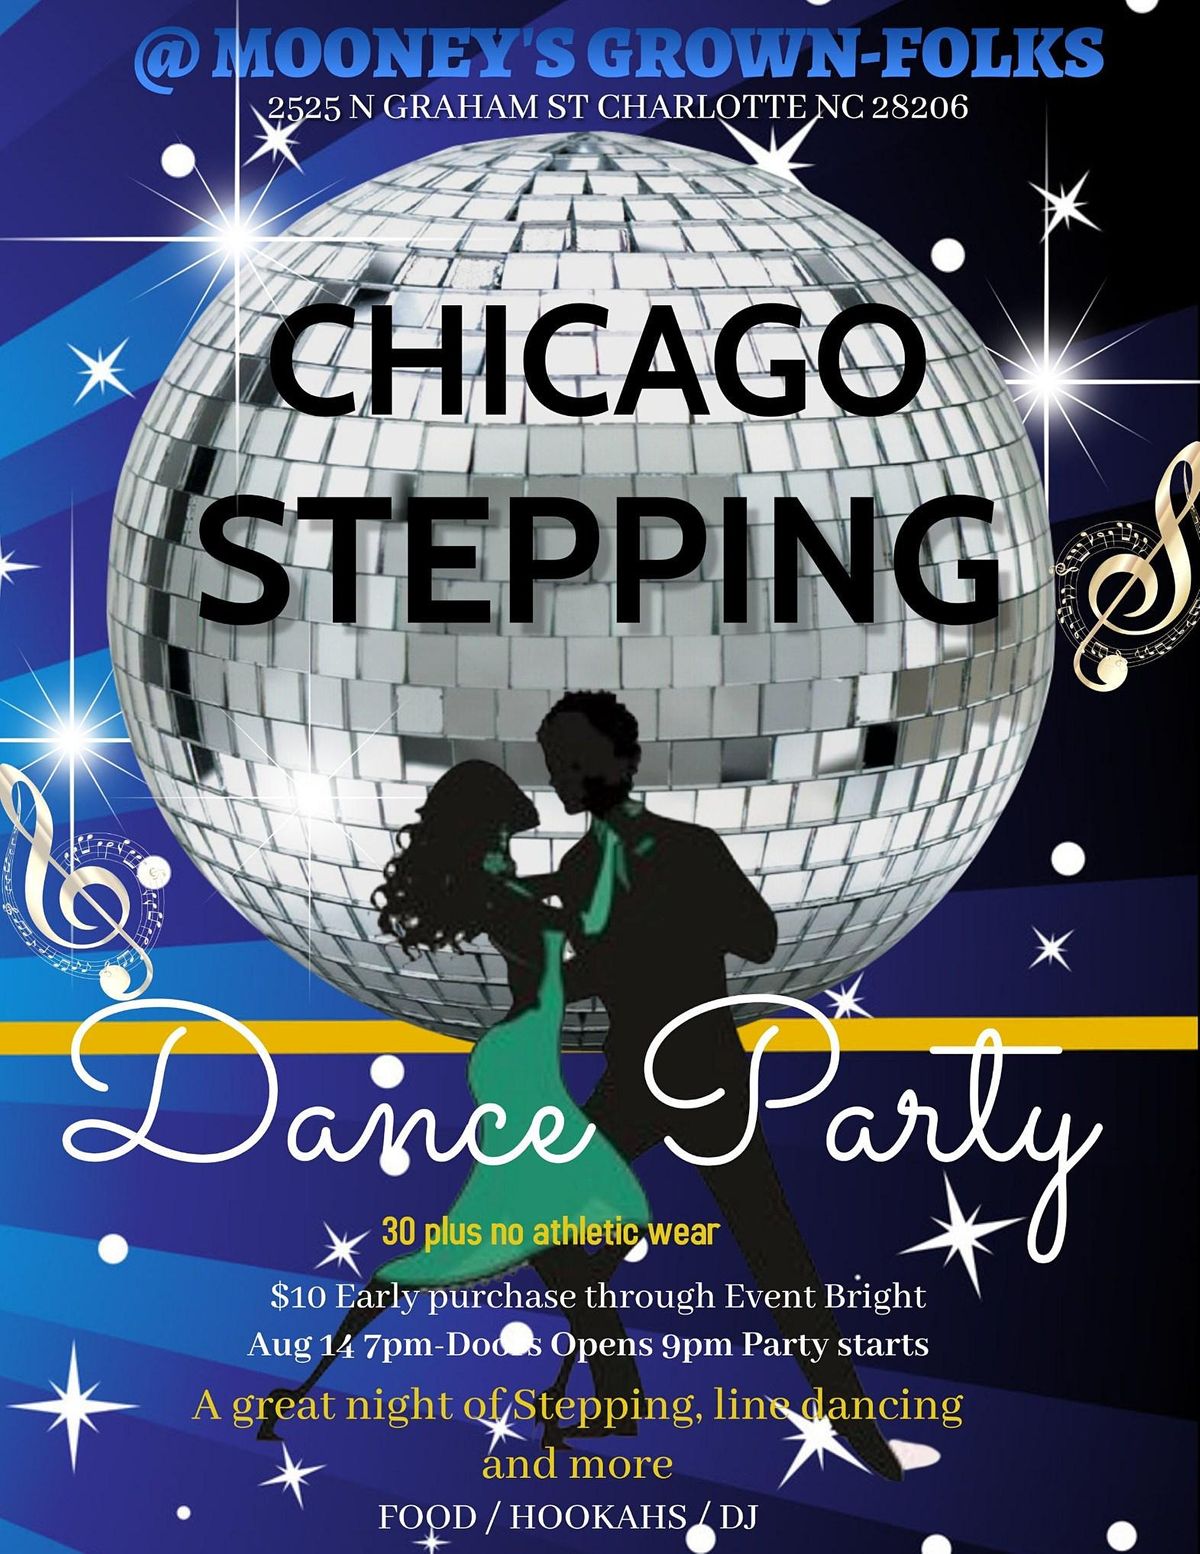 CHICAGO STEPPING DANCE PARTY